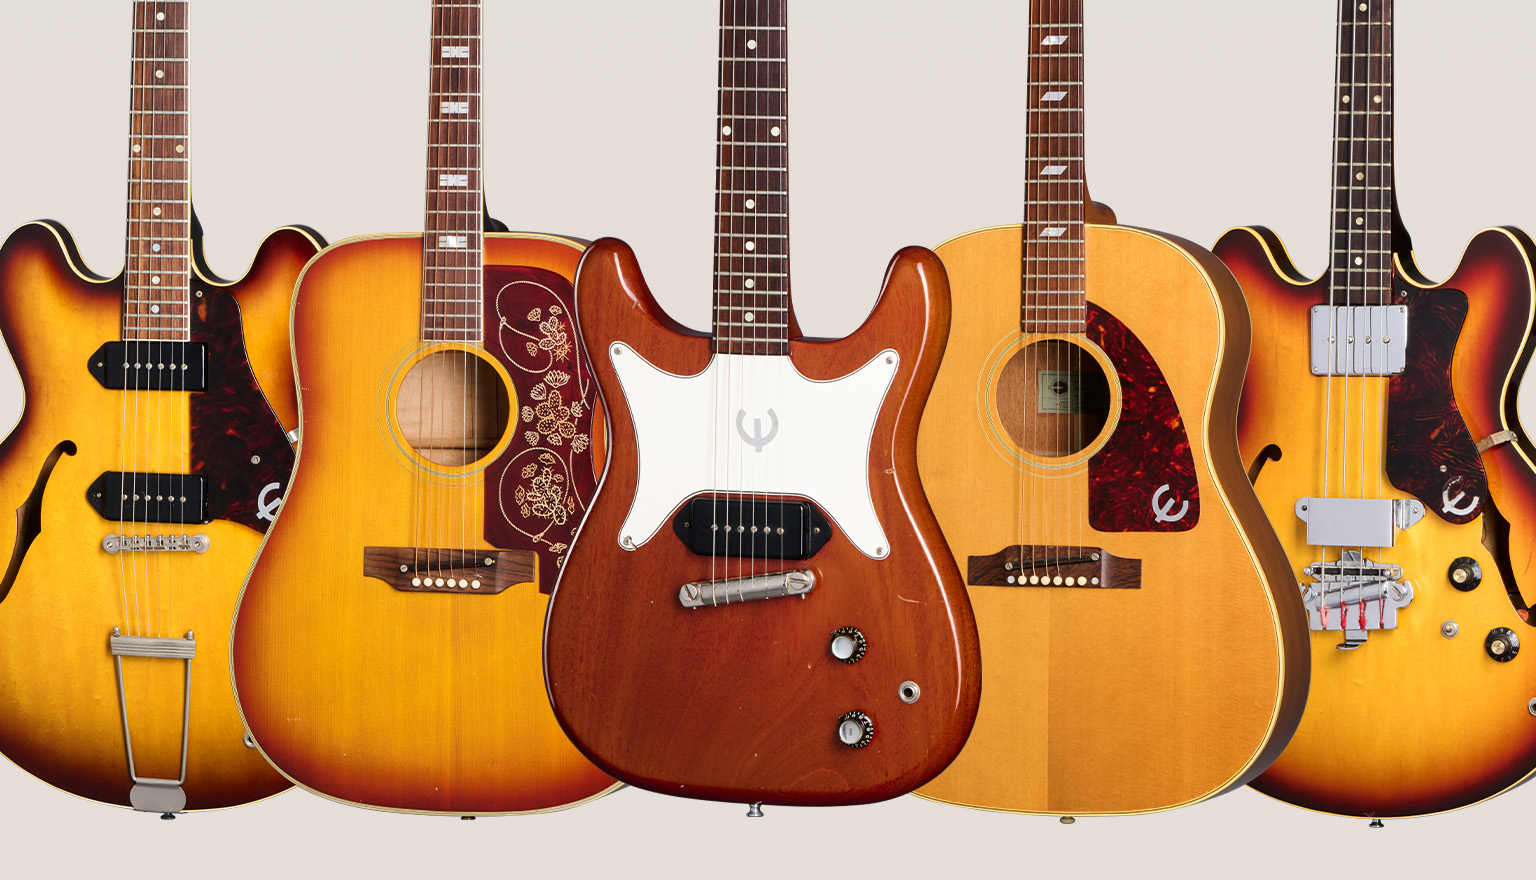 image INTRODUCING EPIPHONE TO THE CERTIFIED VINTAGE PROGRAM